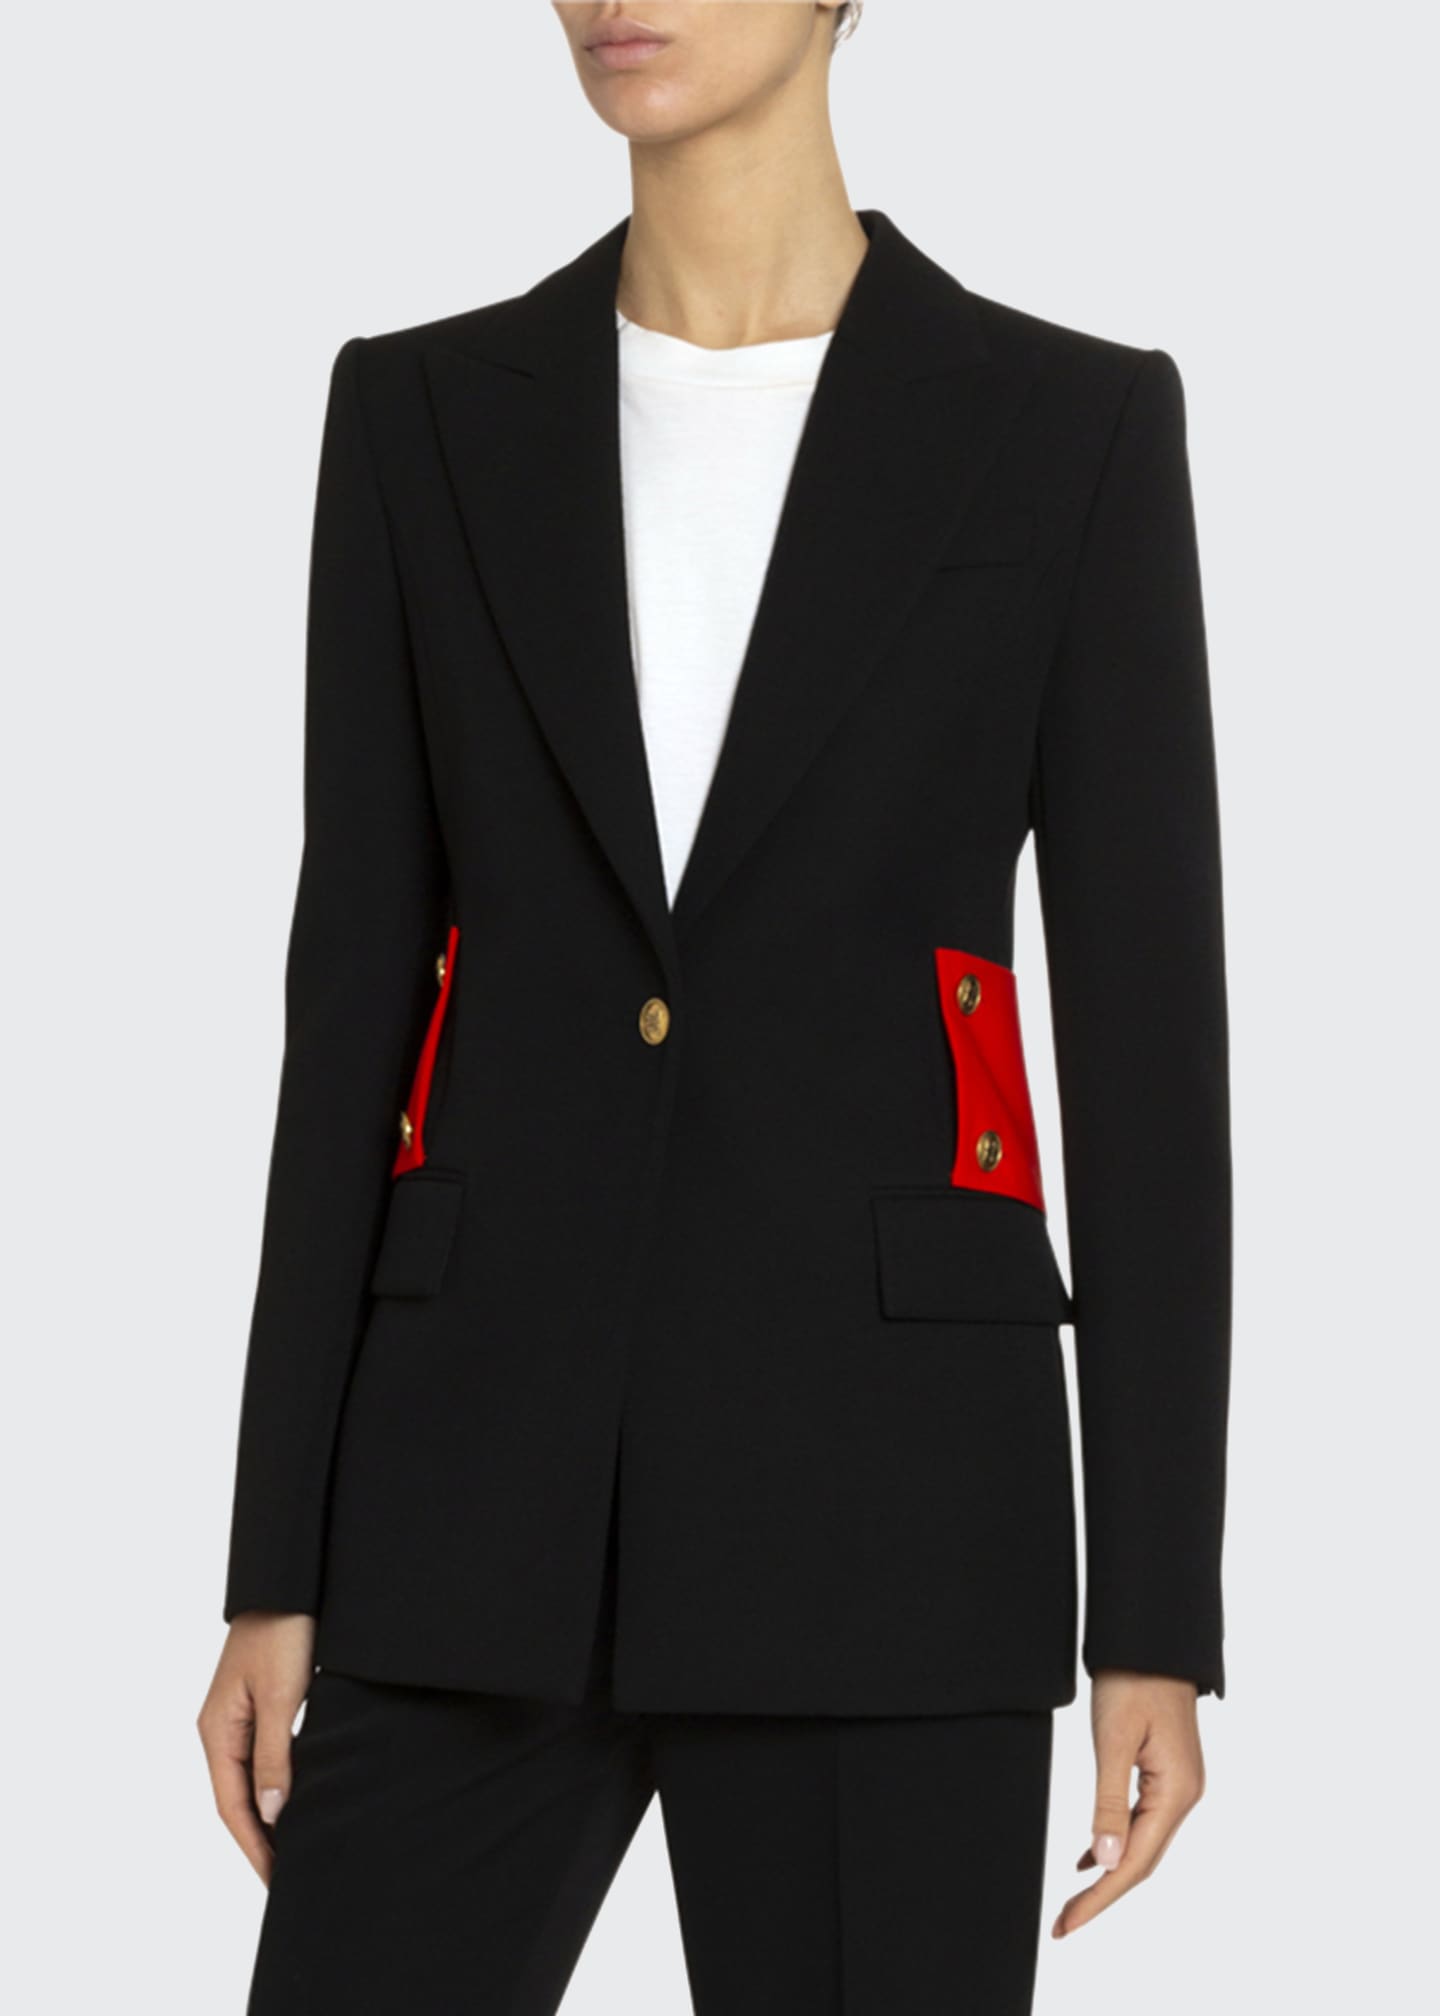 Givenchy Wool Tricotine Martingale Coat - Bergdorf Goodman